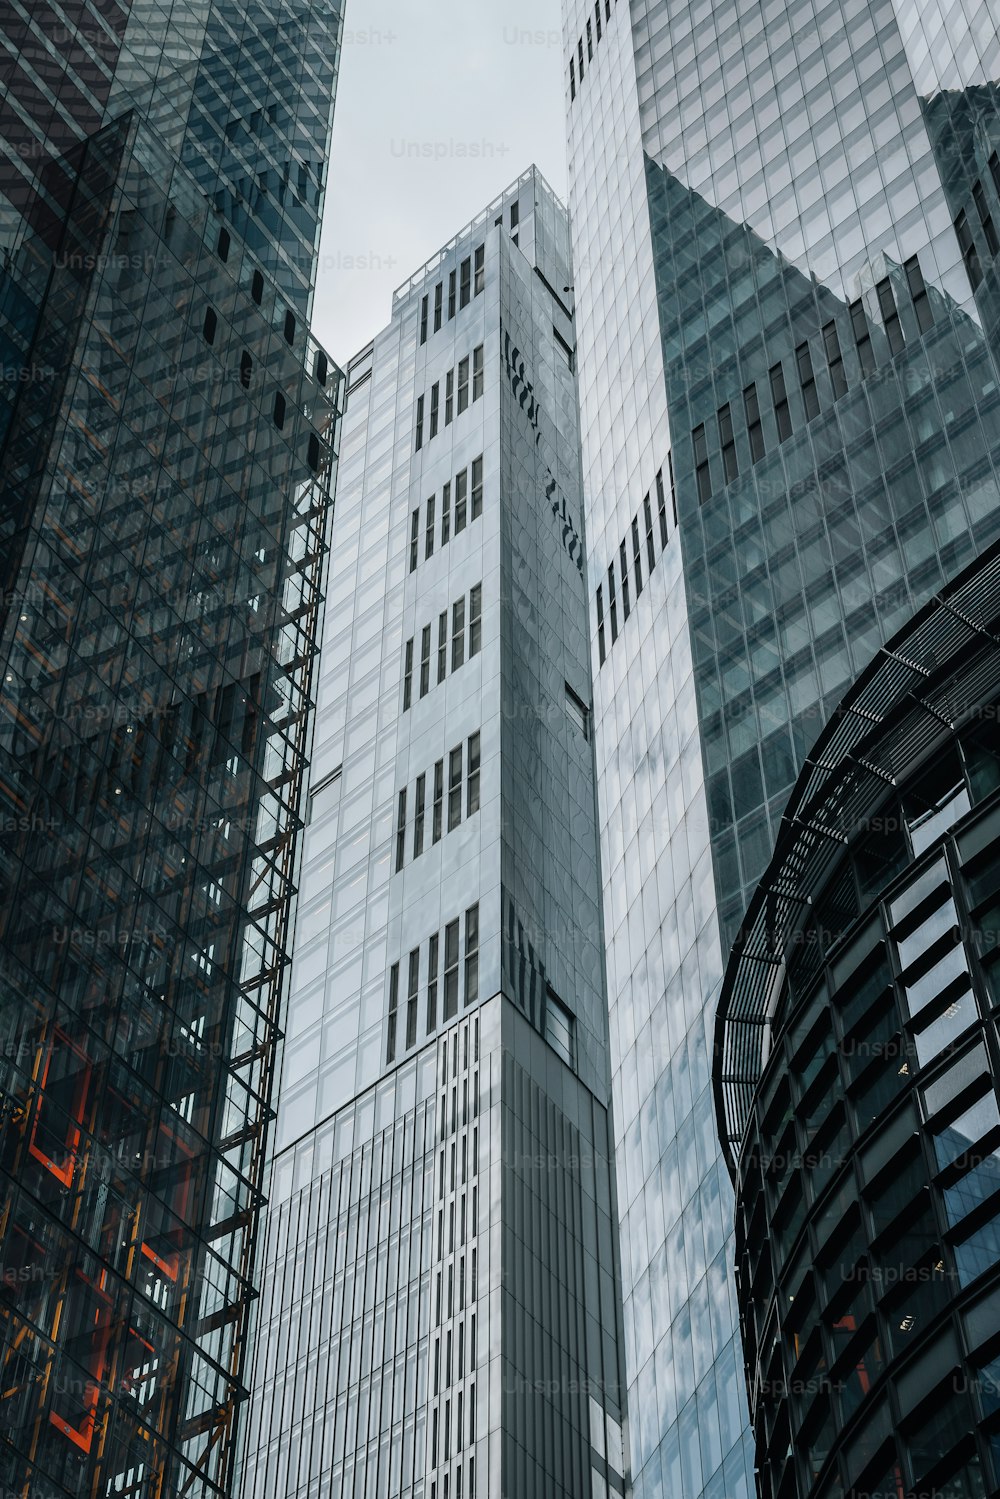 a group of tall buildings with scaffolding around them